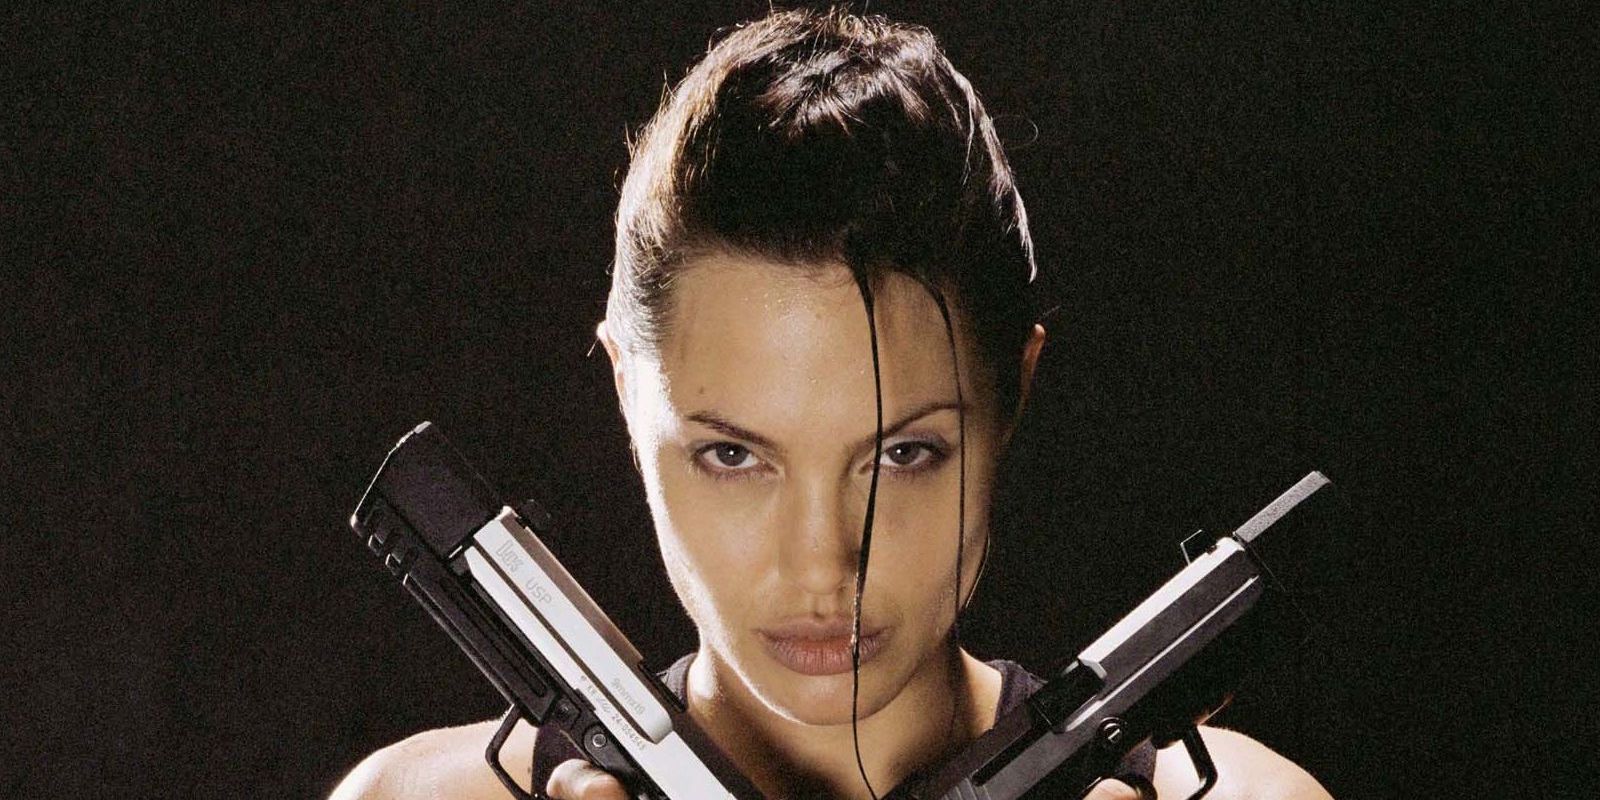 Angelina Jolie as Lara Croft in a promo image for Tomb Raider.